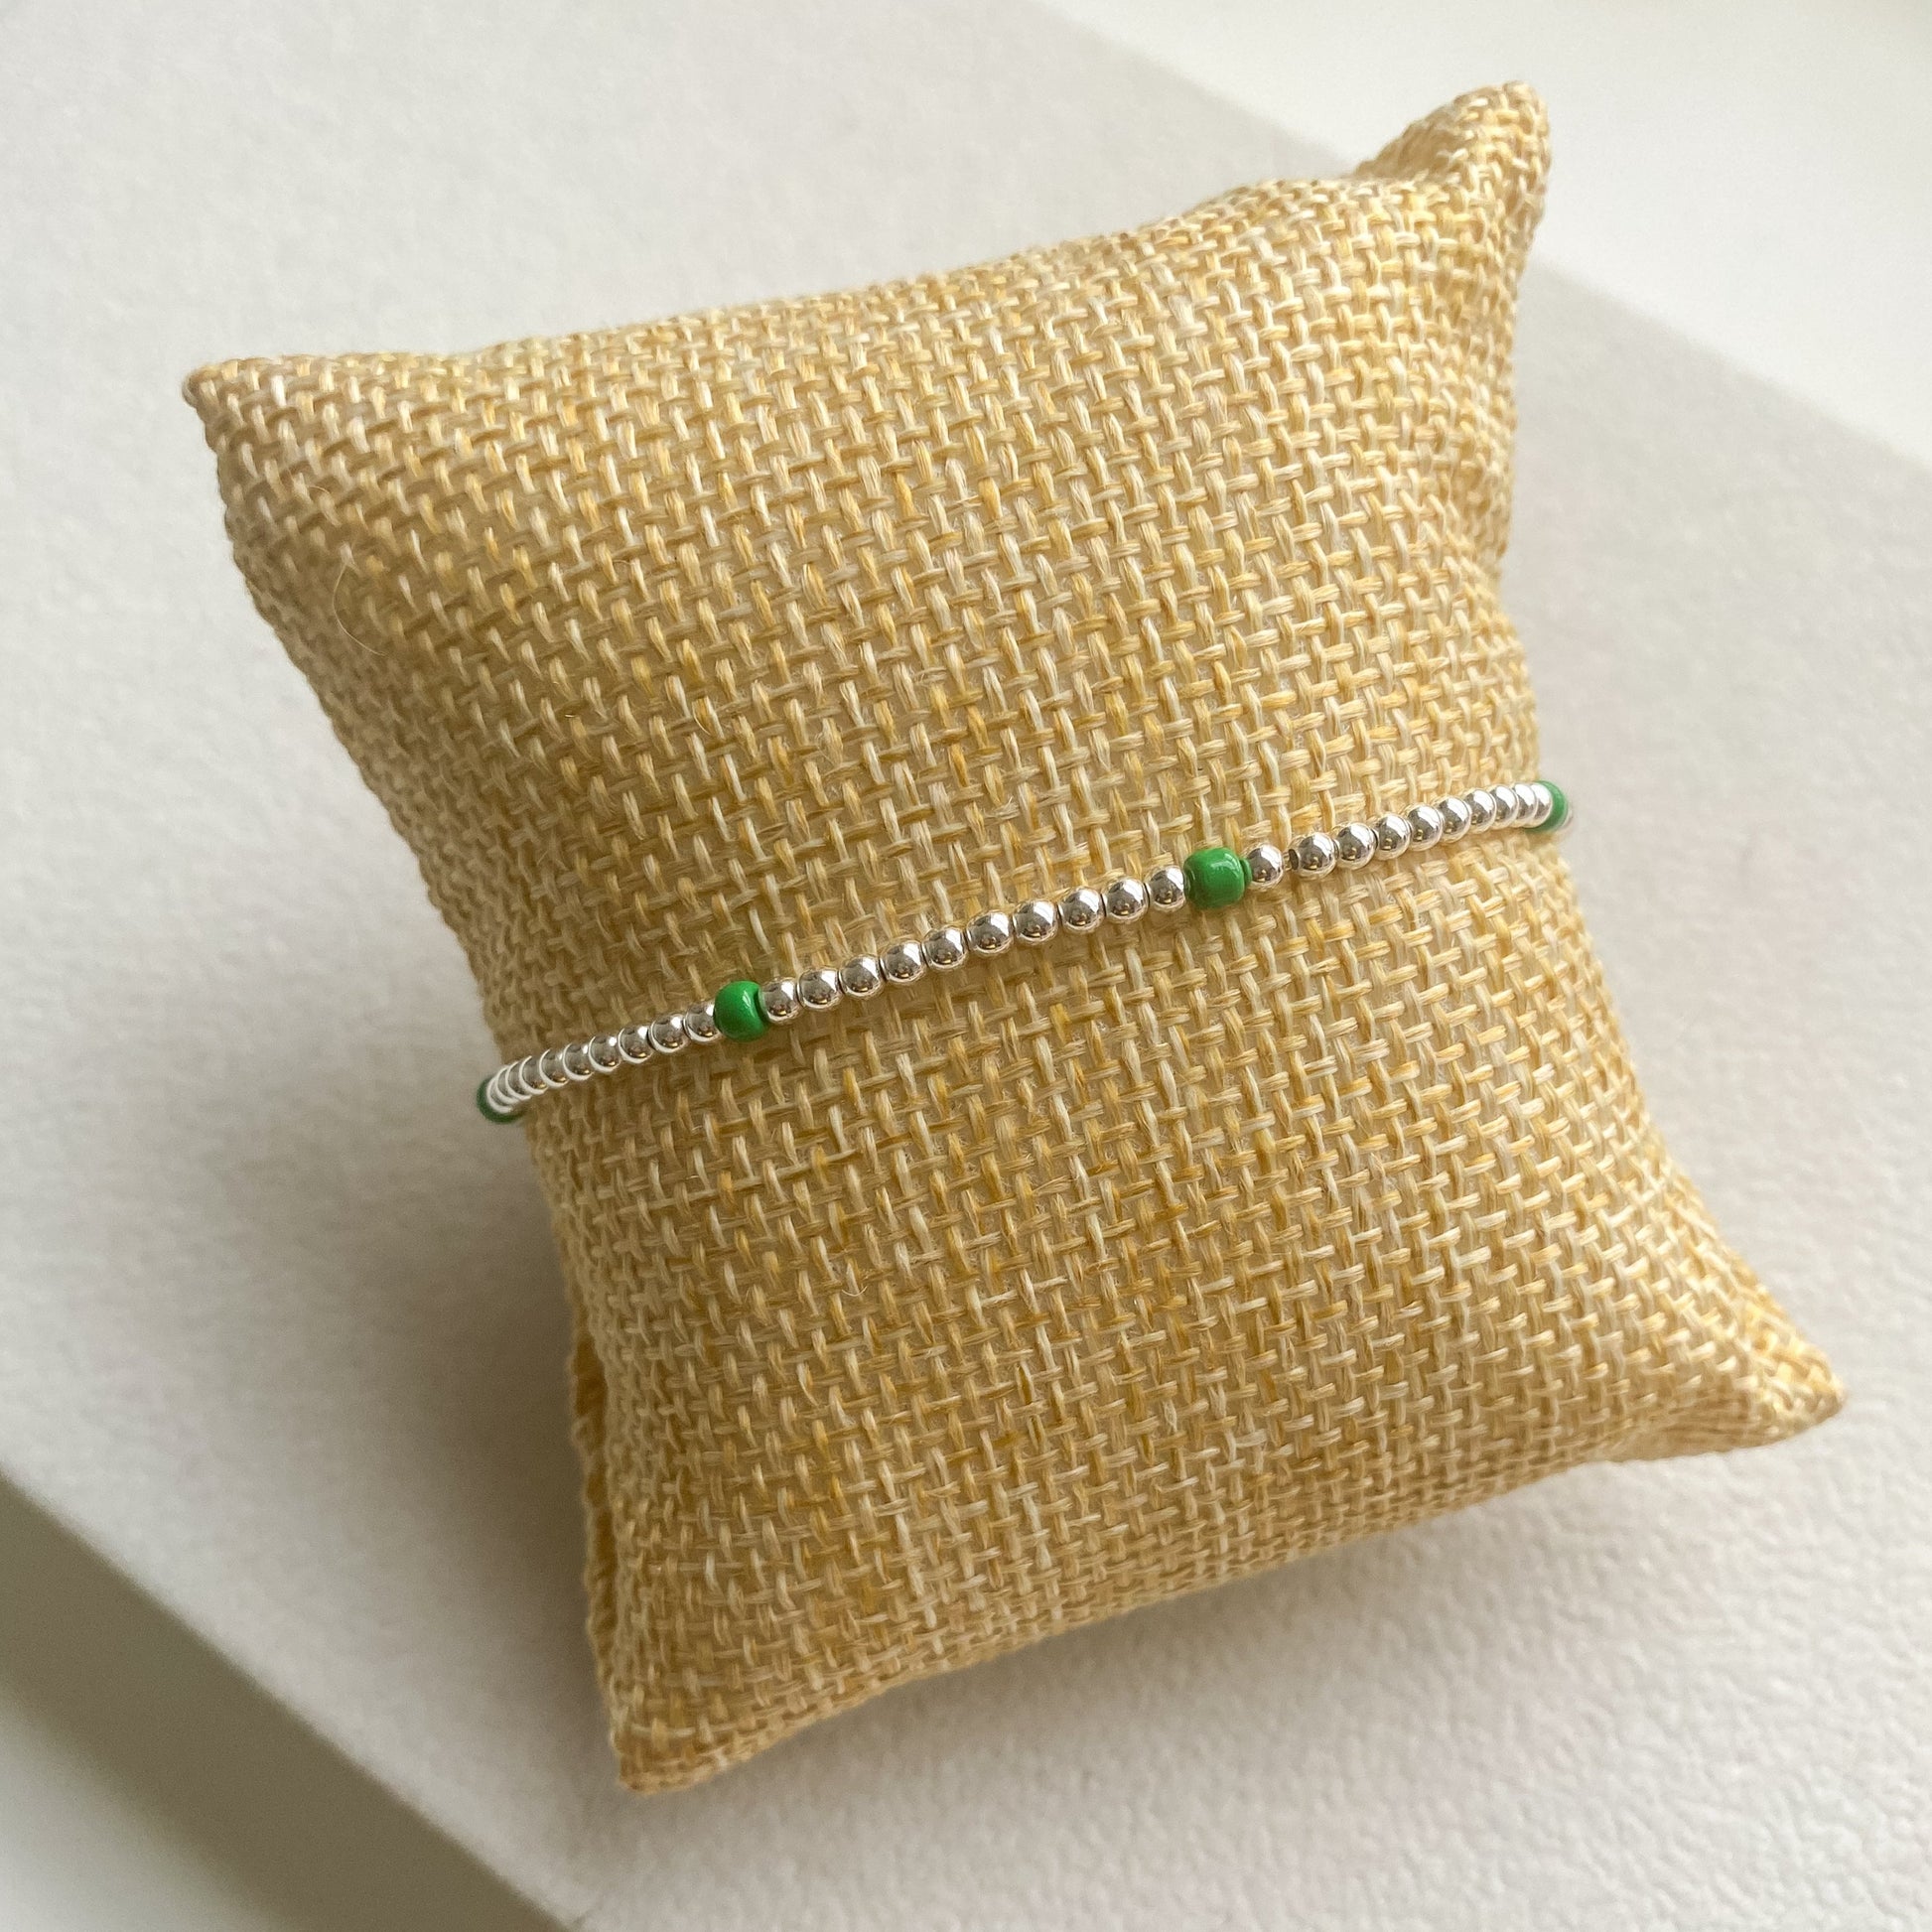 Green and silver beaded bracelet